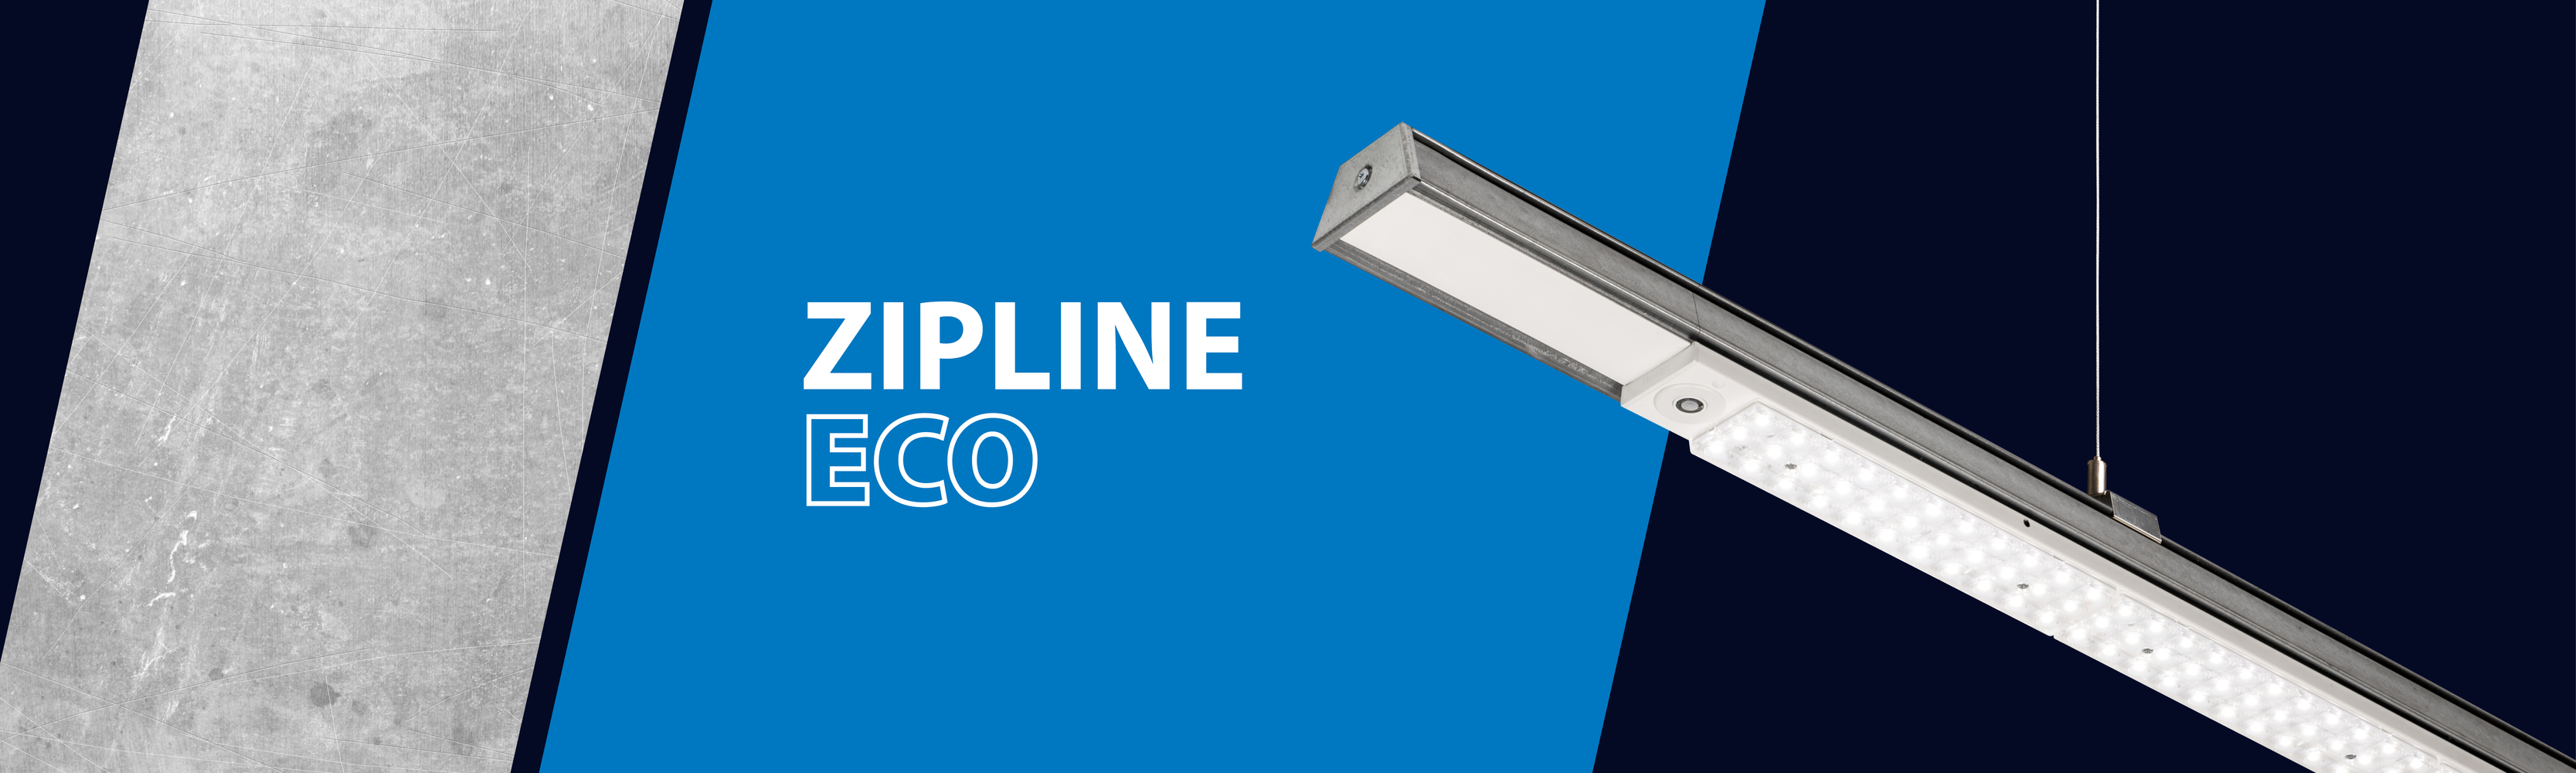 Zipline Eco - Flexible trunking and lighting system for industry